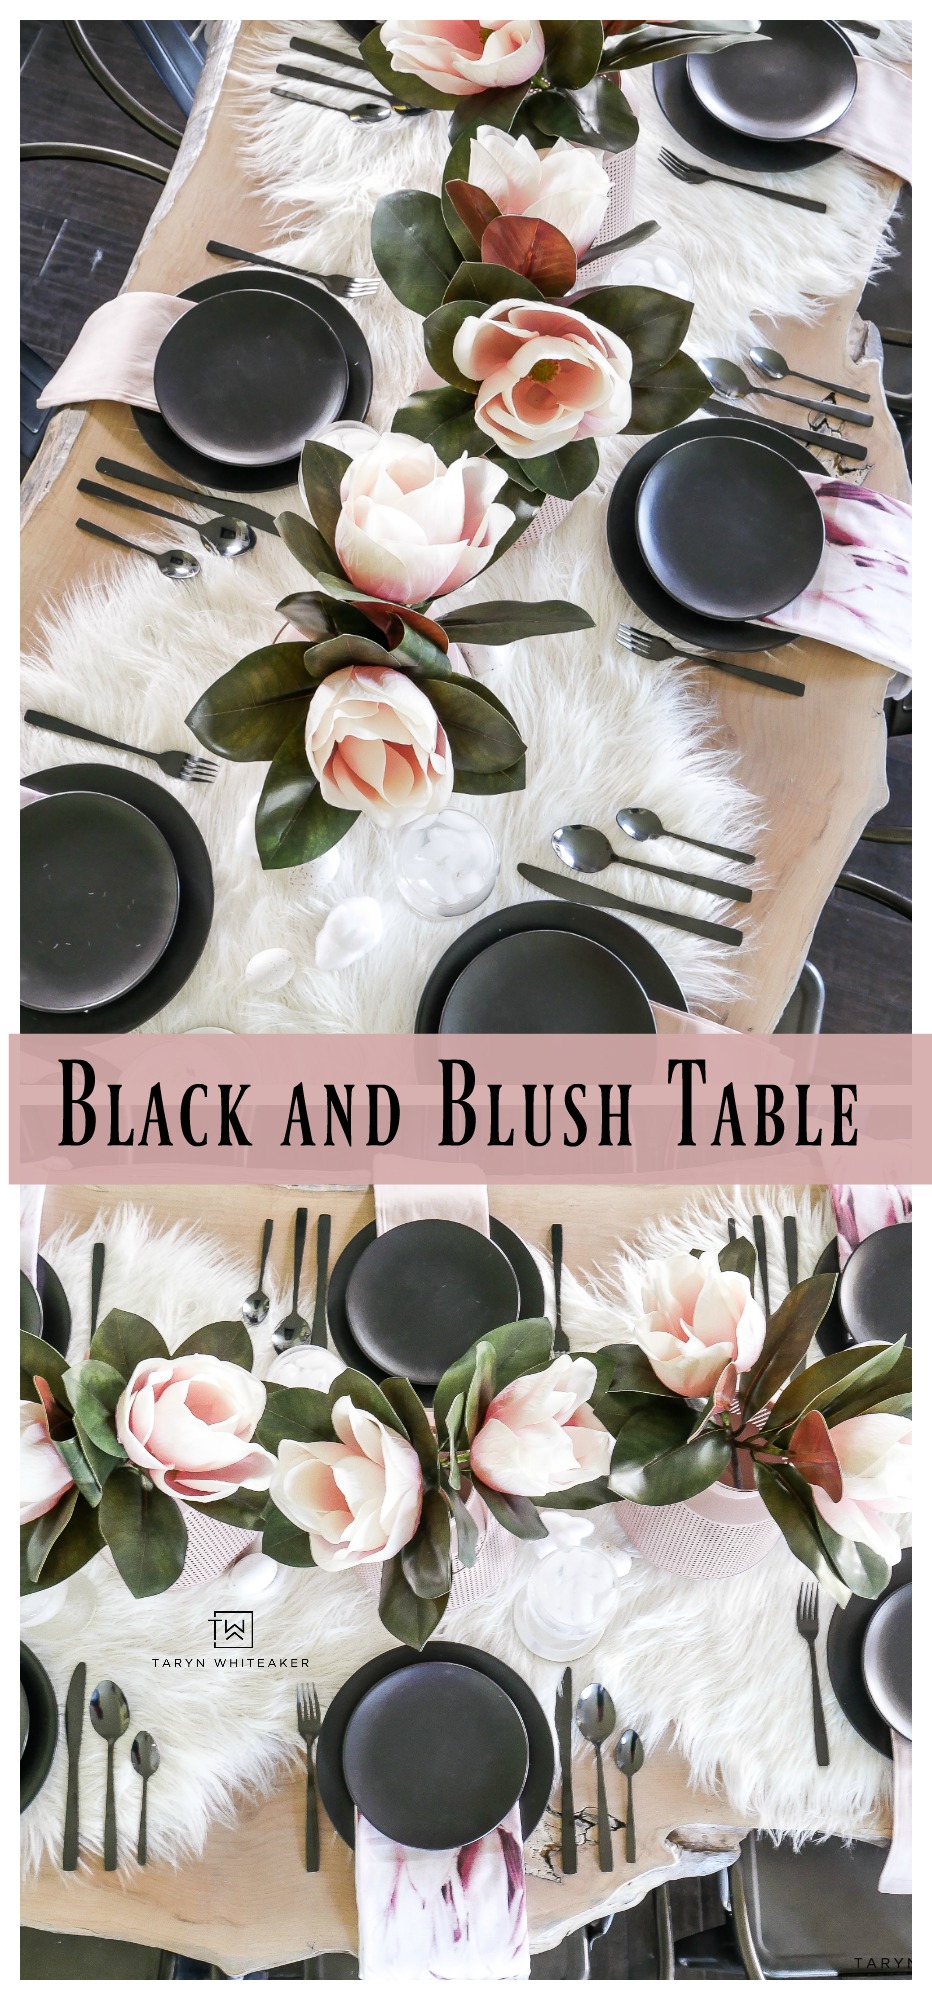 Simple can still be dramatic with this black and blush table decor. The black and white table with pops of floral and pink is the perfect combo.